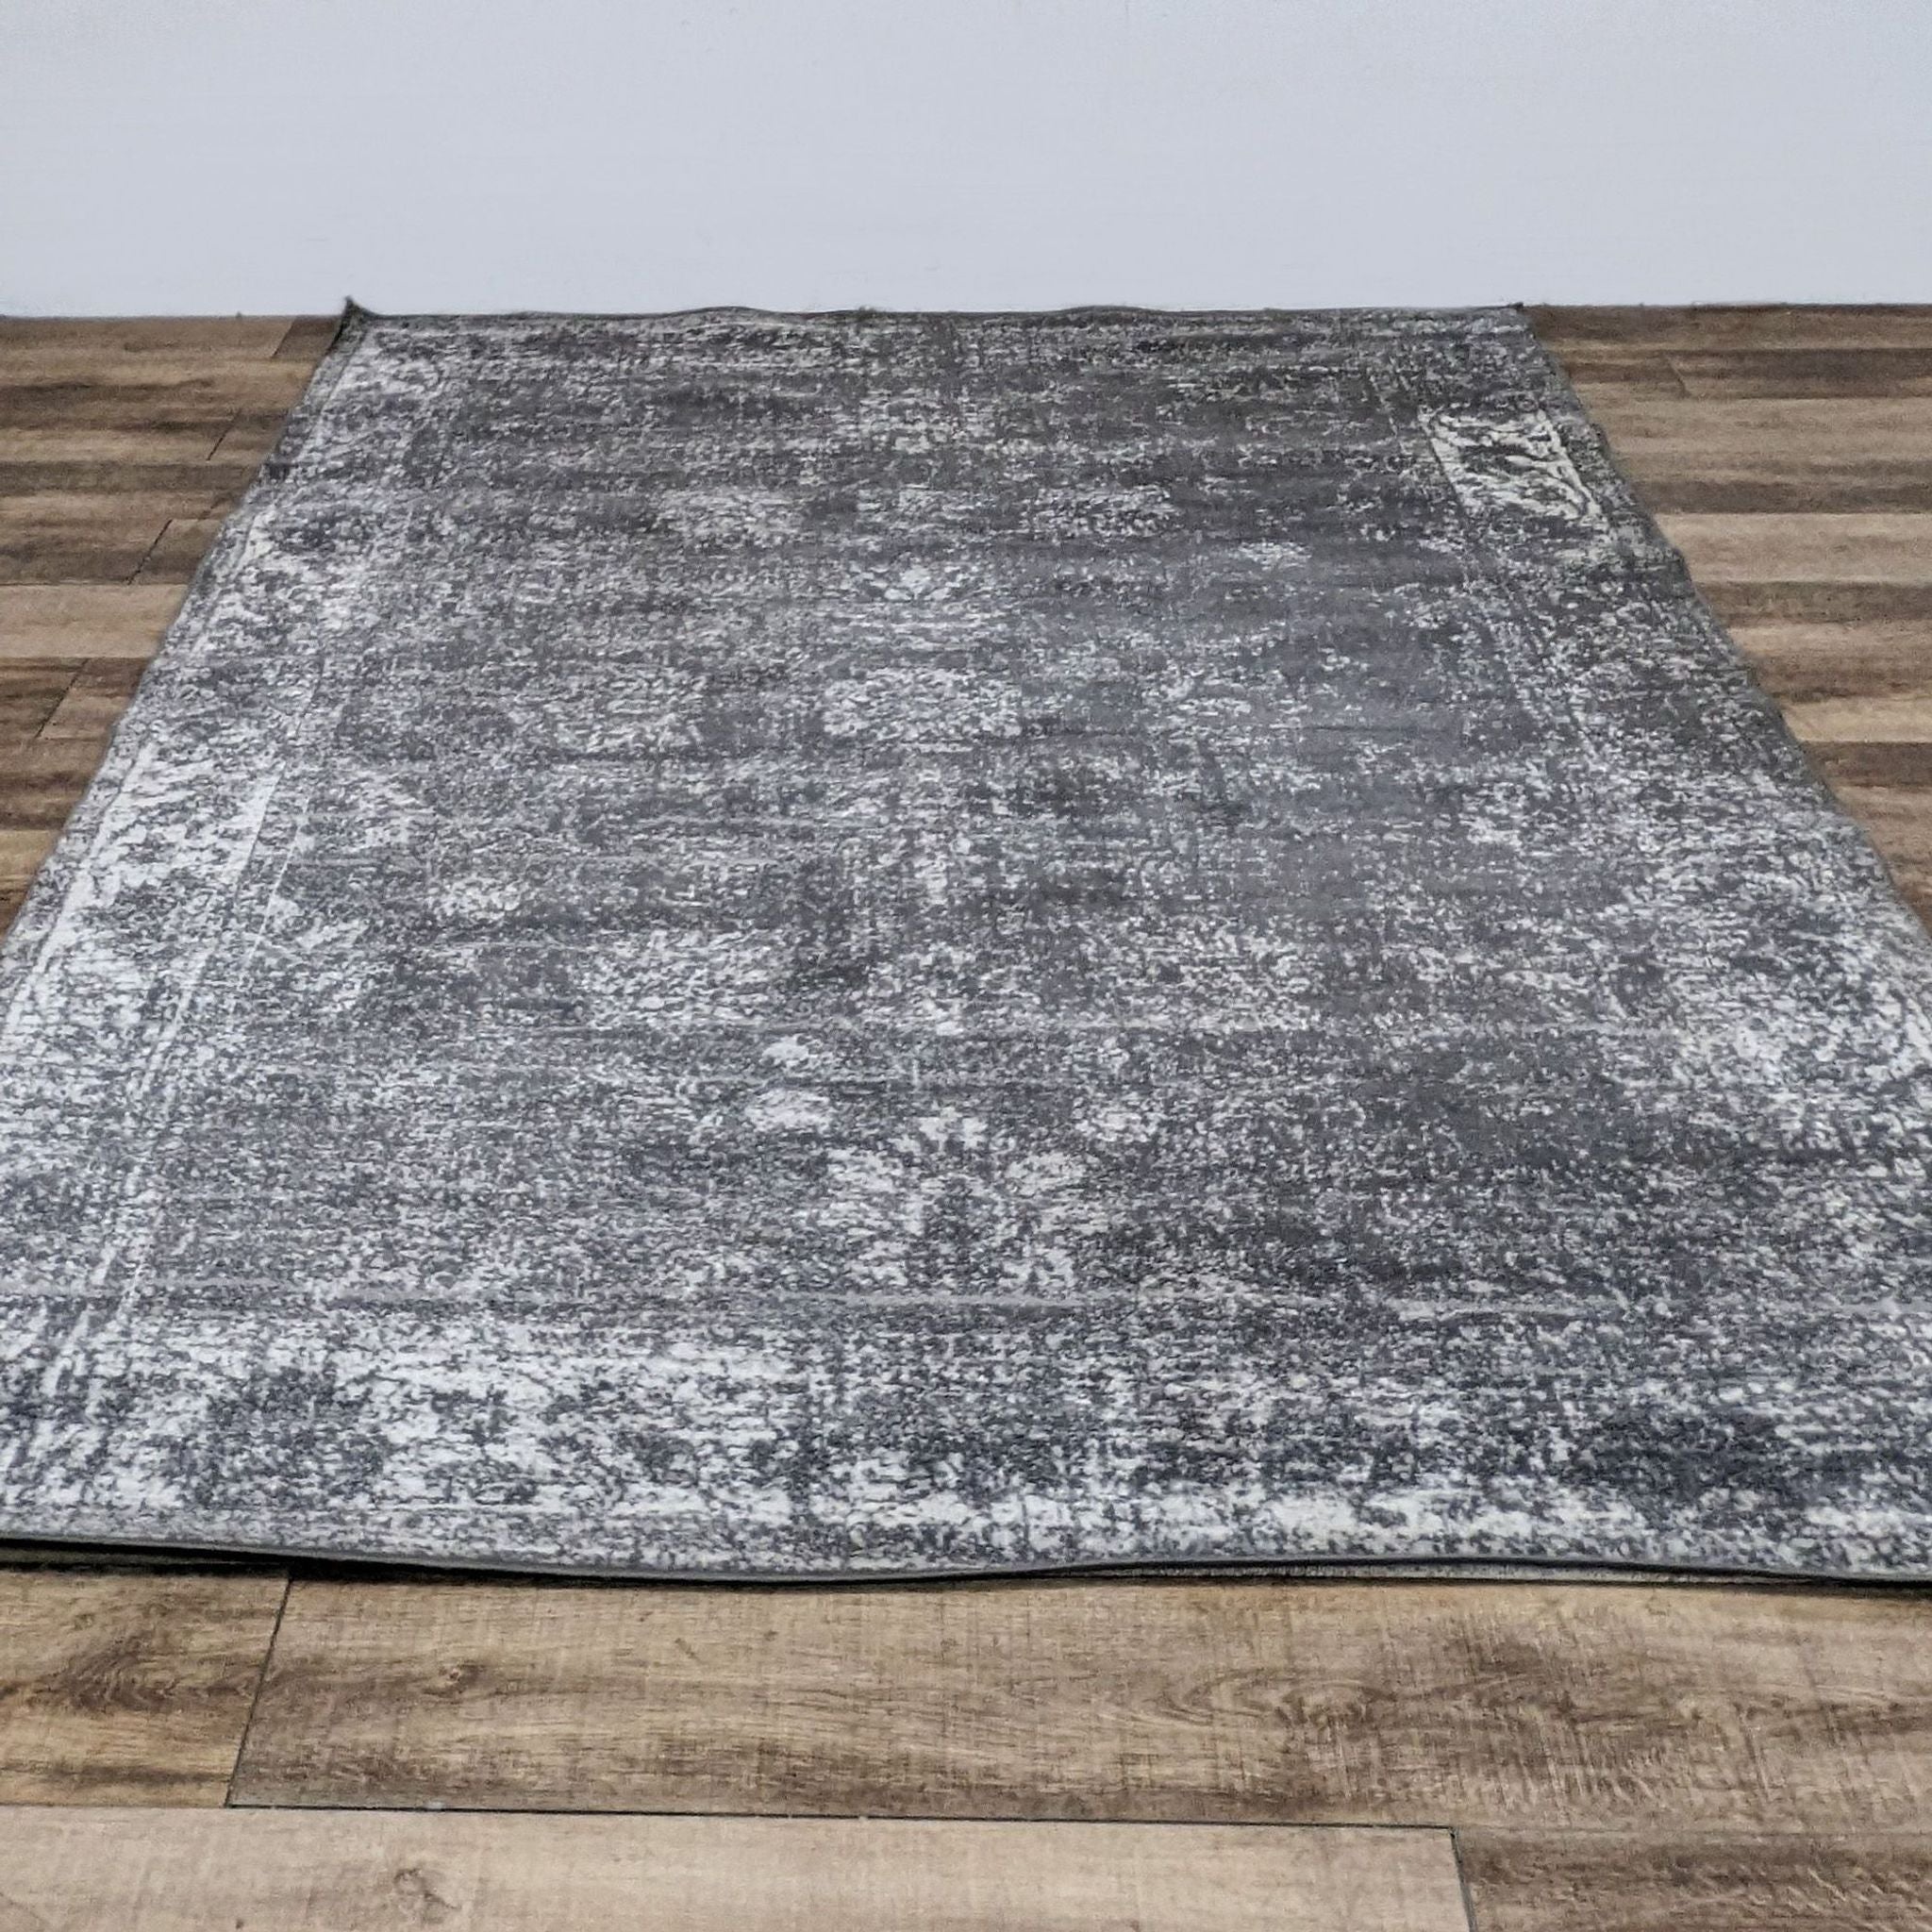 Sofia area rug by Unique Loom with a distressed gray pattern, medium pile, and laid on wooden flooring.